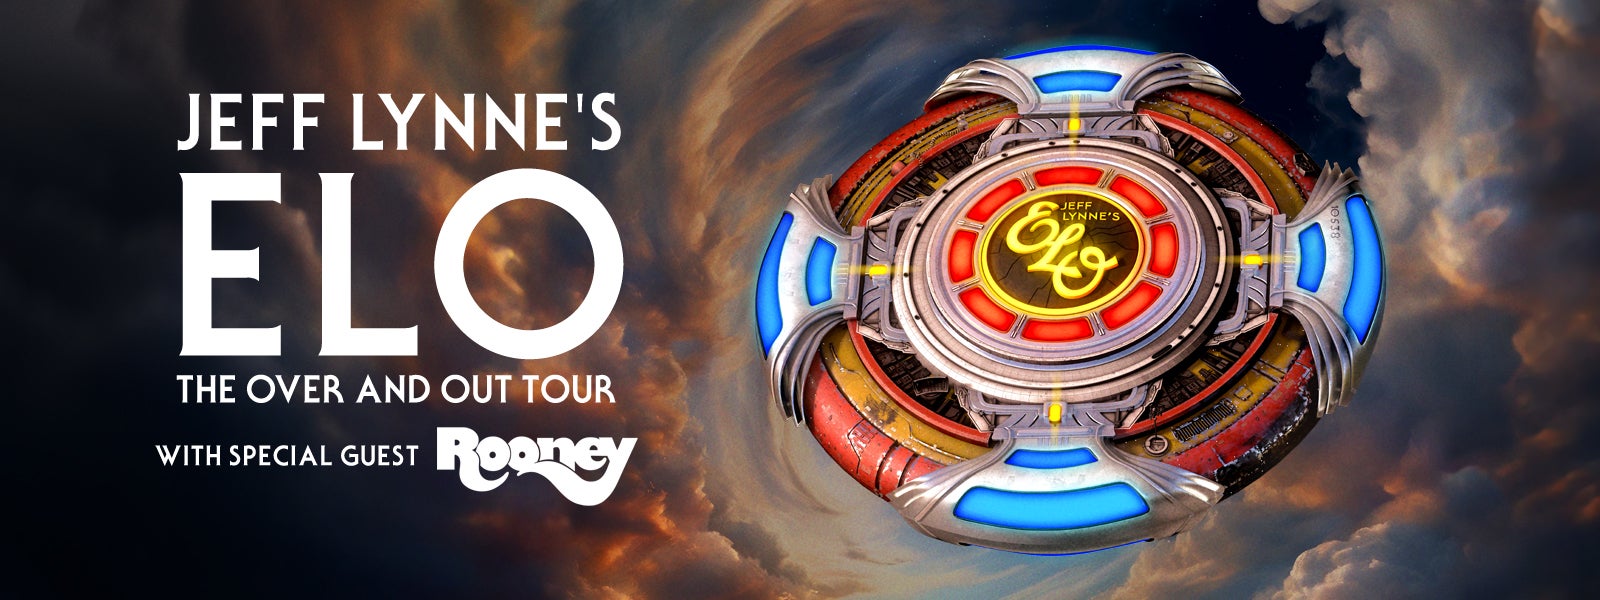 Jeff Lynne's ELO: THE OVER AND OUT TOUR